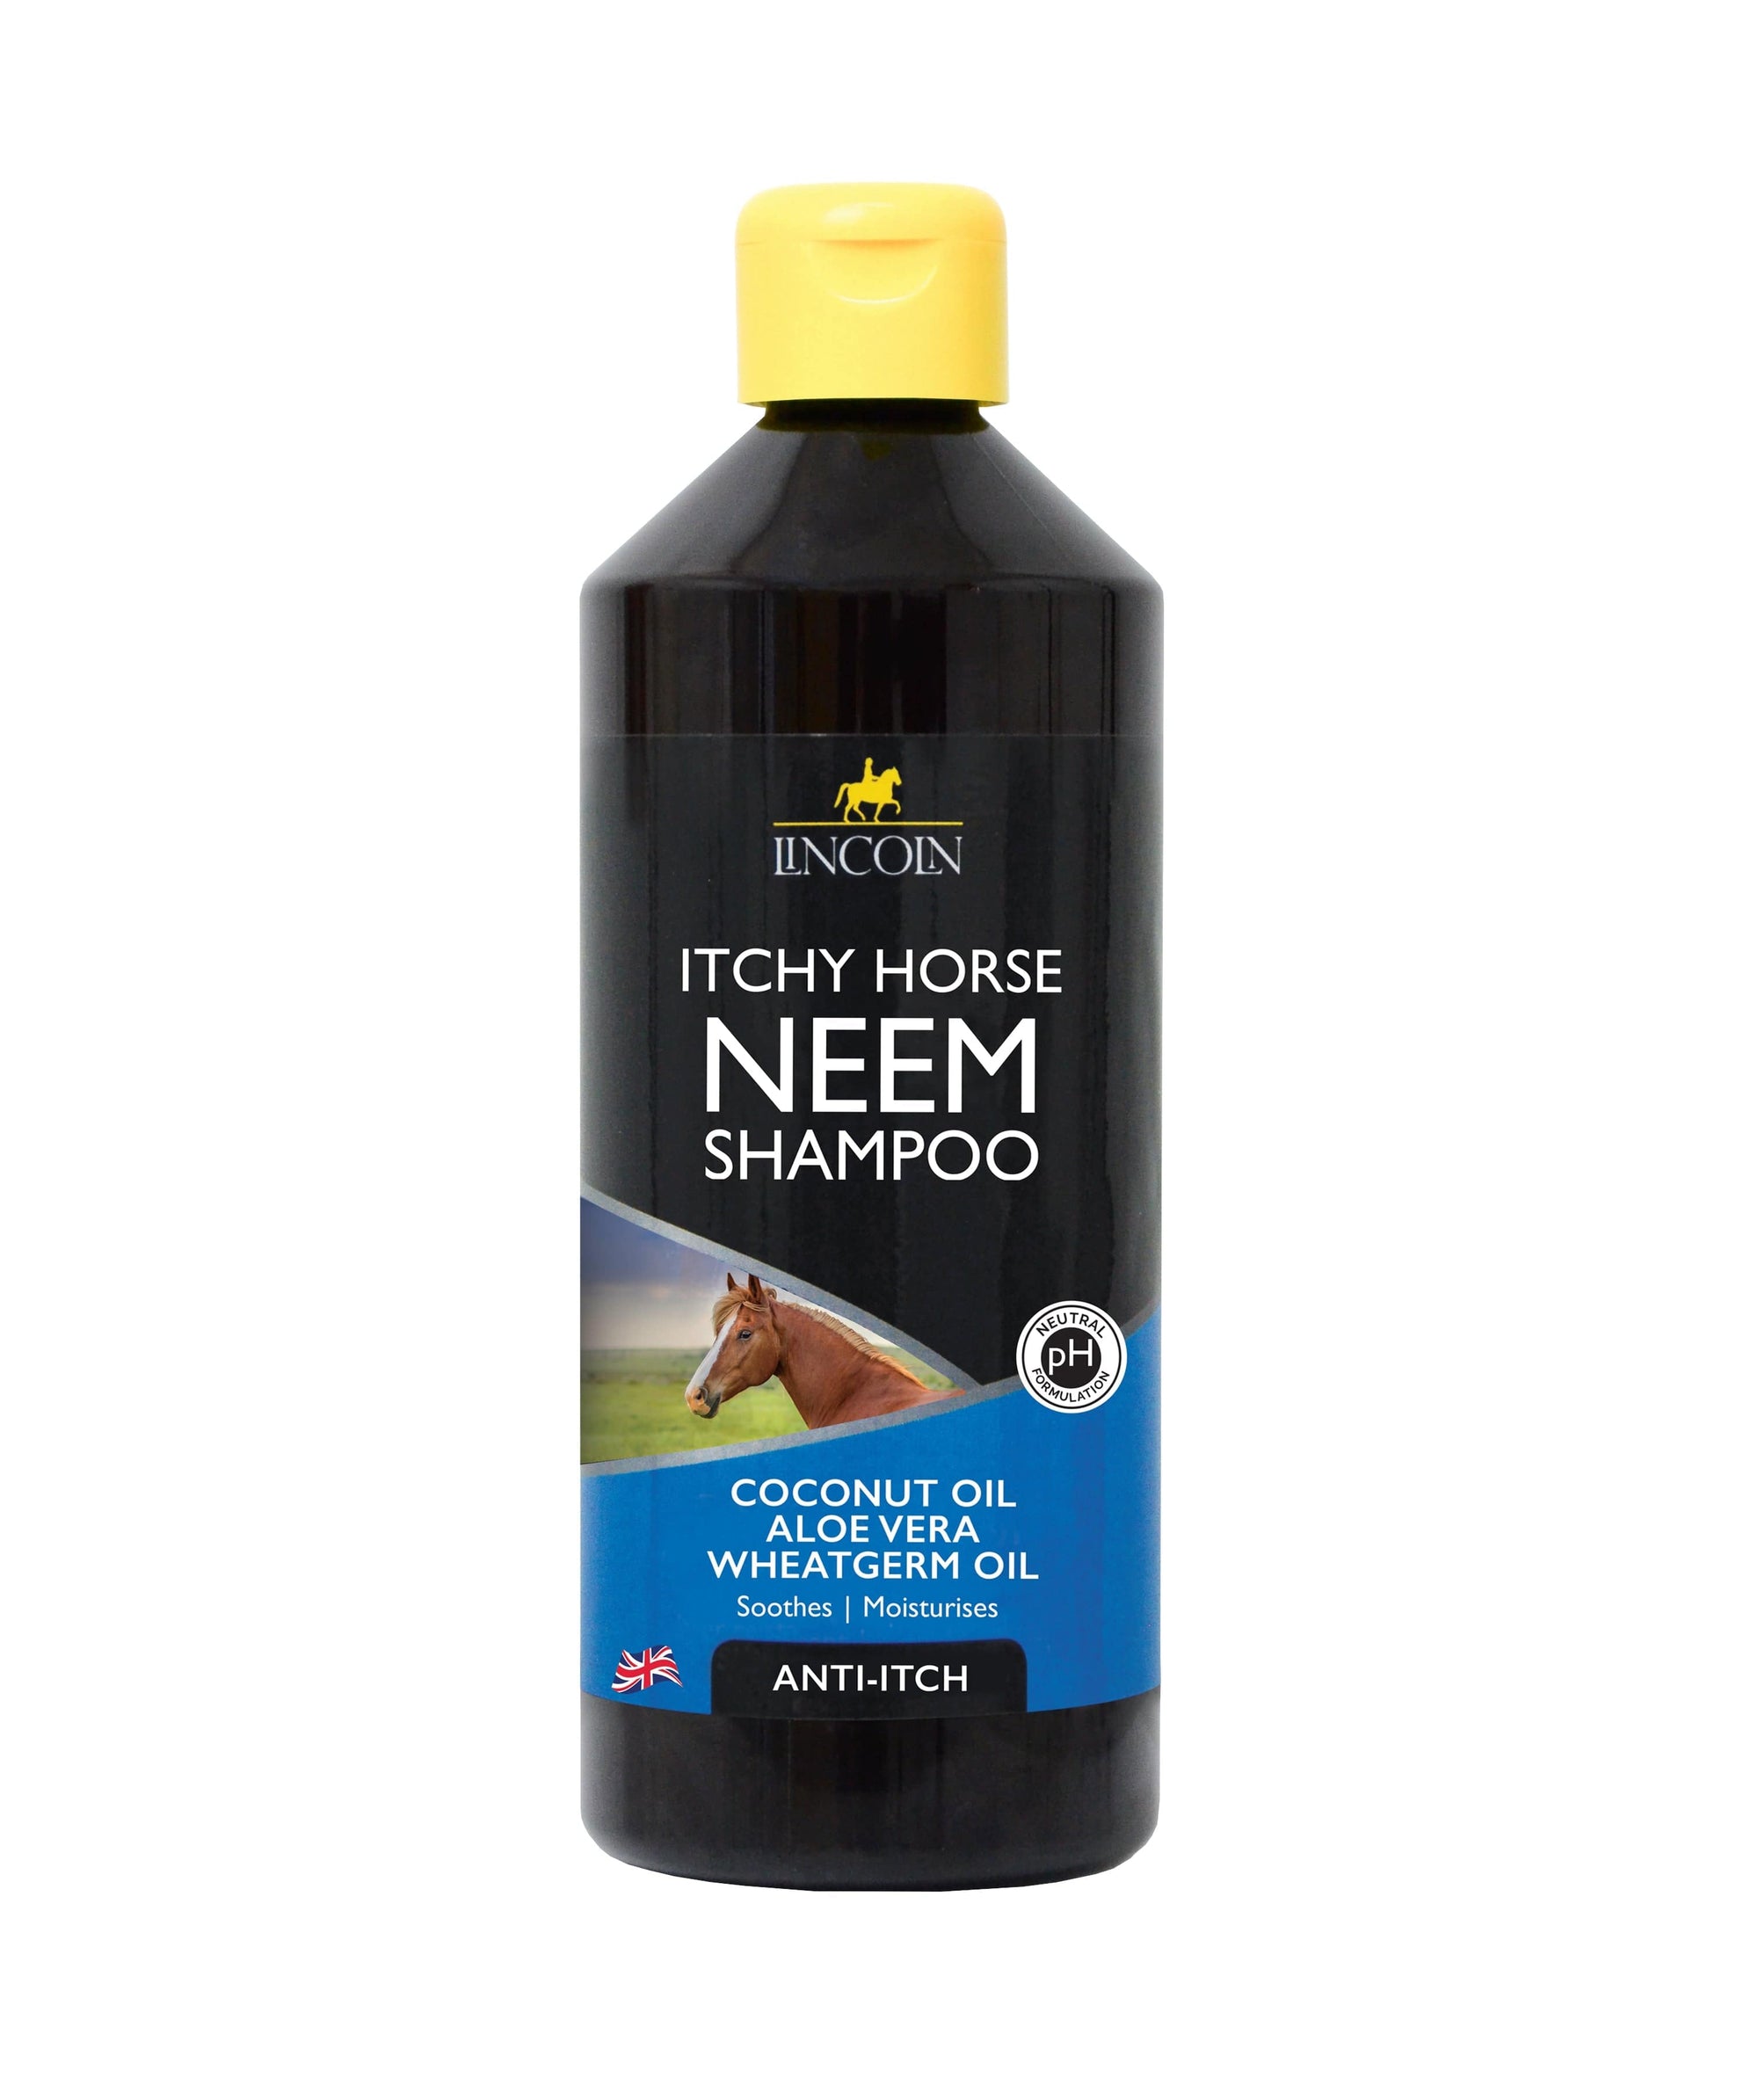 Lincoln itchy horse neem shampoo